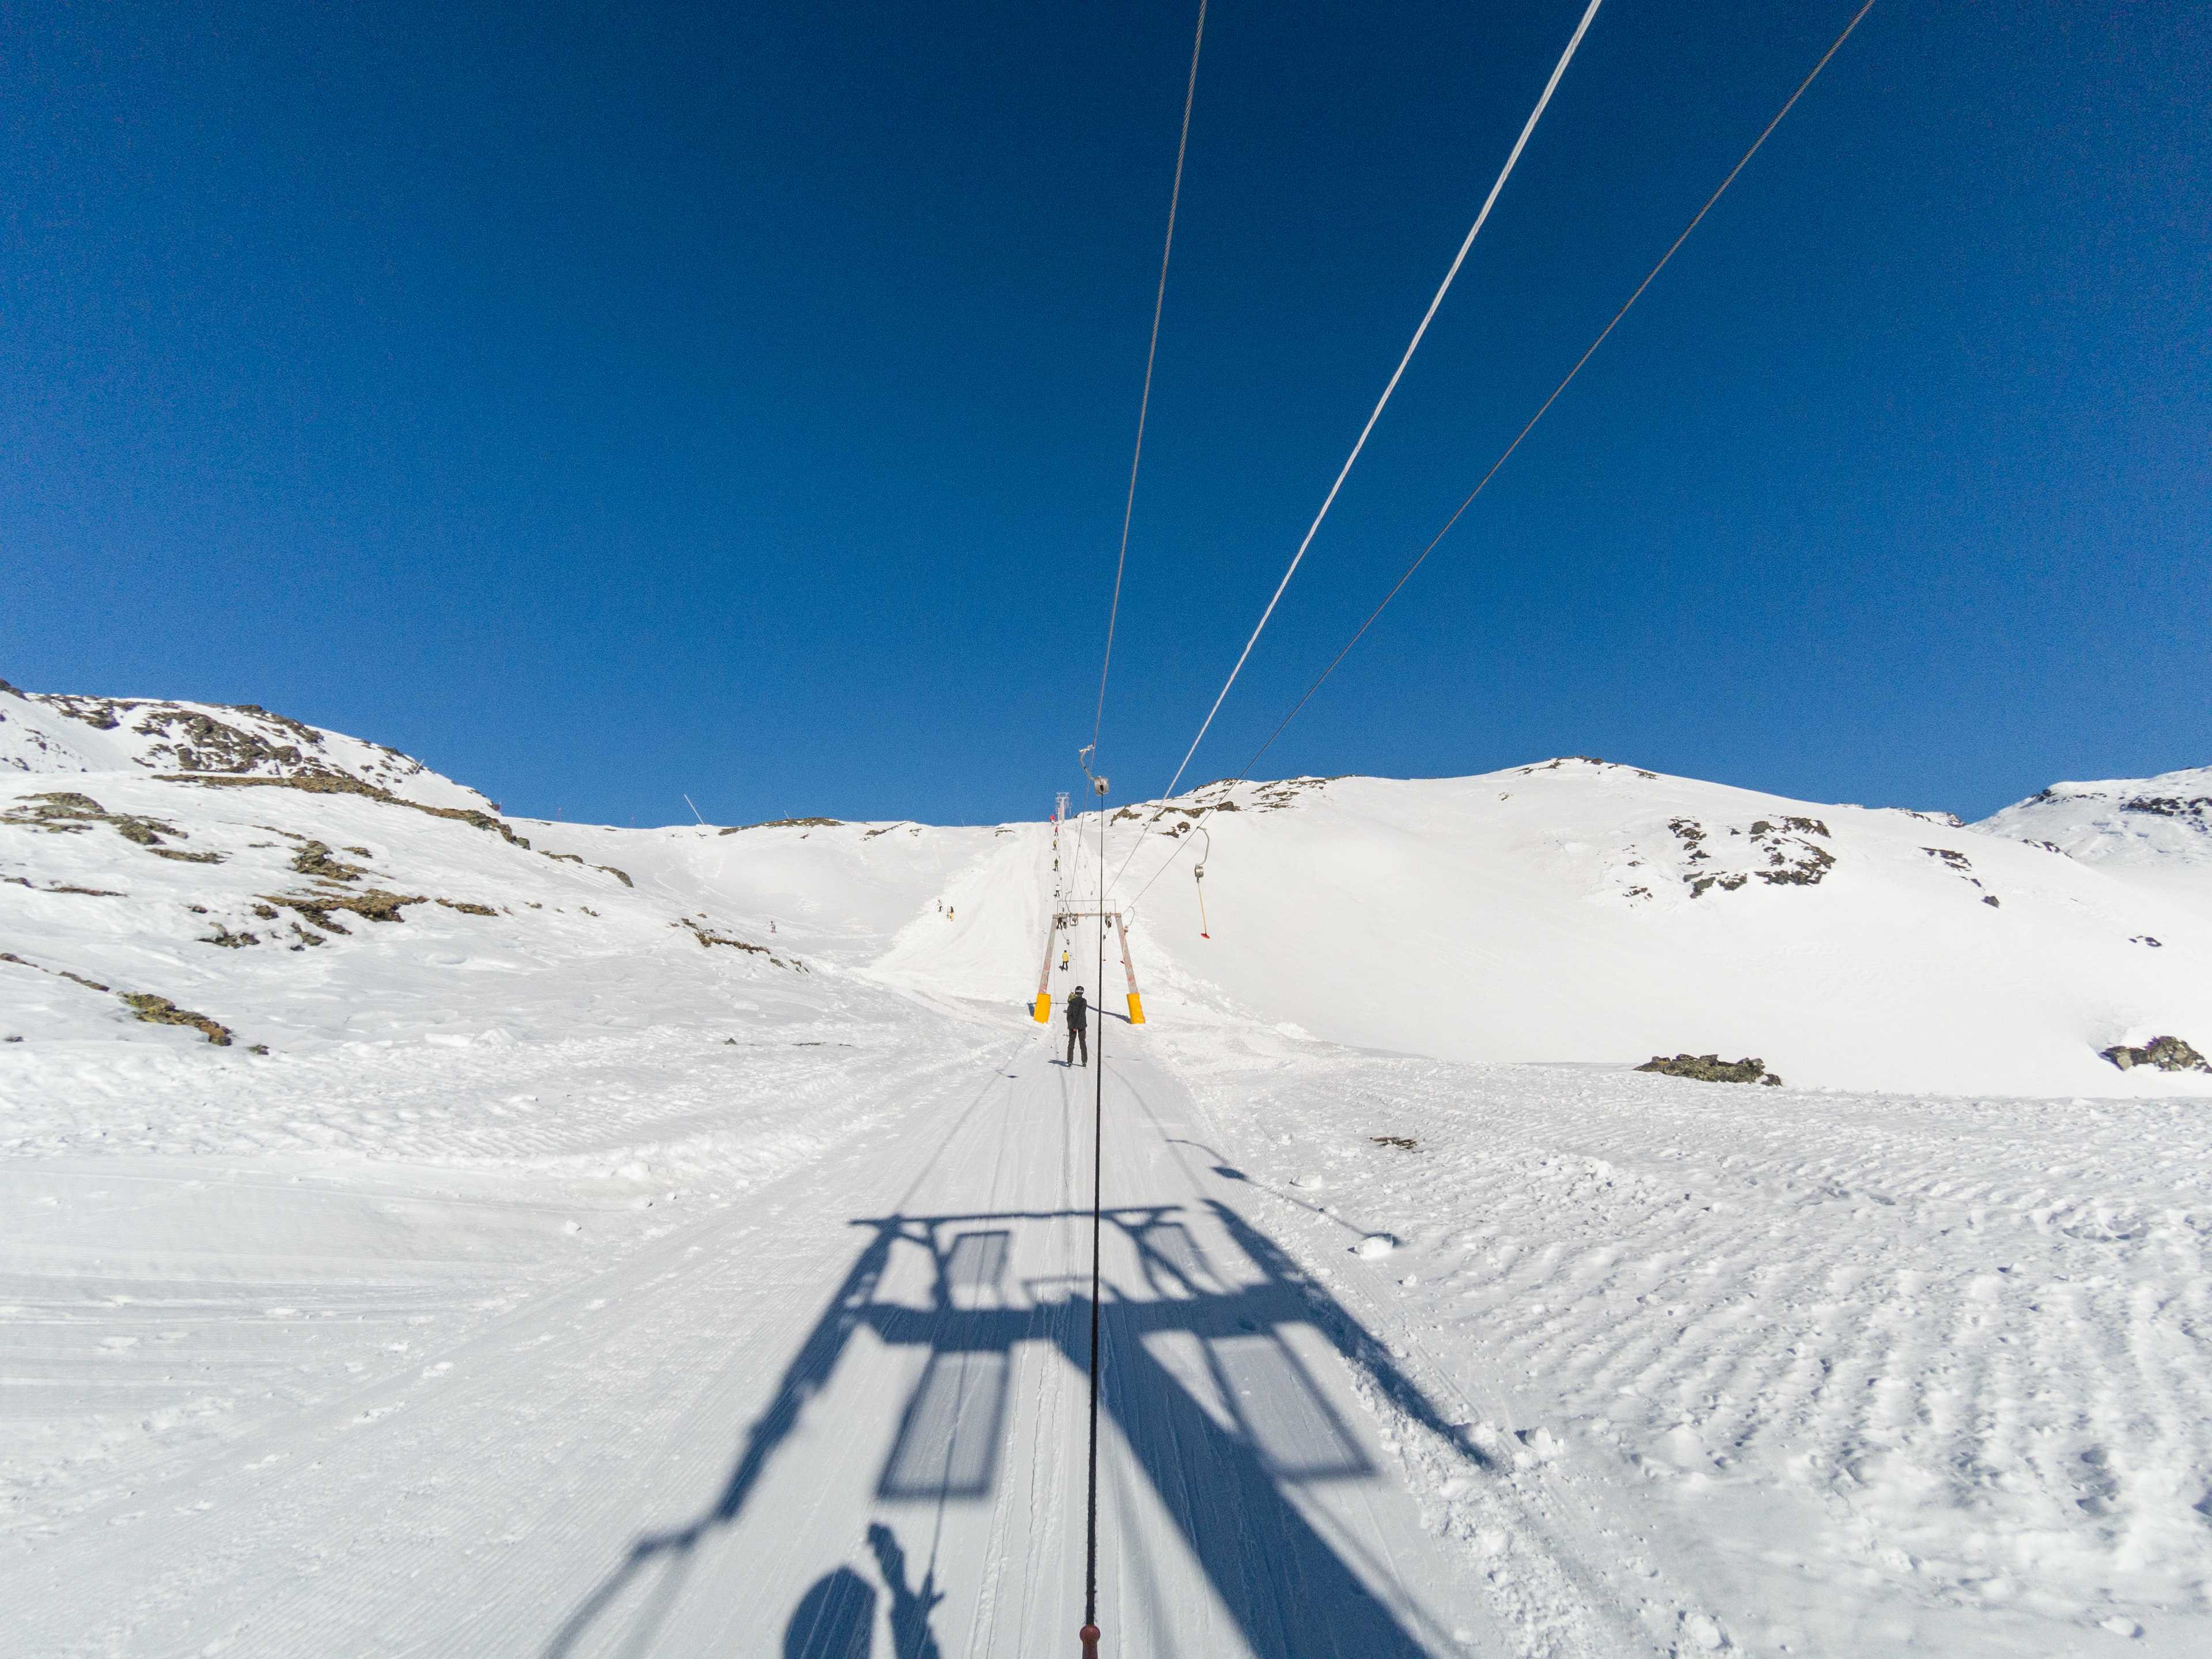 Gran Sometta ski lift, to be replaced with a modern sixpack chairlift, Cervinia